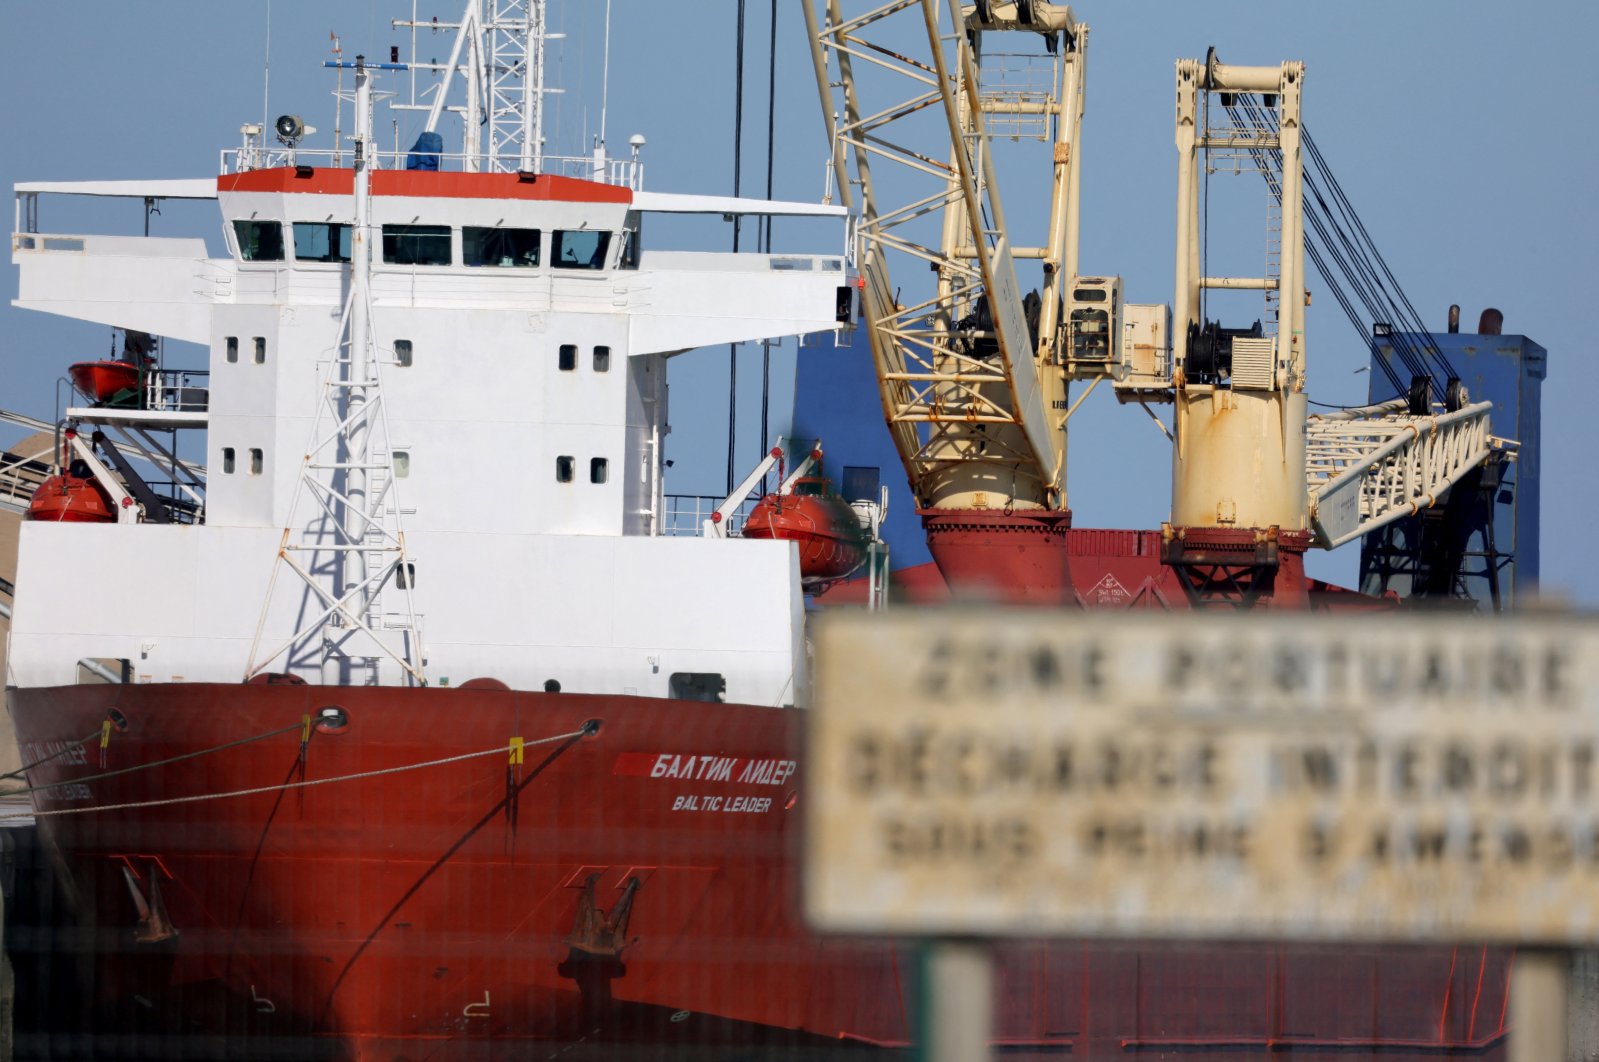 Russian cargo ship, in the port of Boulogne-sur-Meri, France, Feb. 26, 2022. (Reuters Photo)